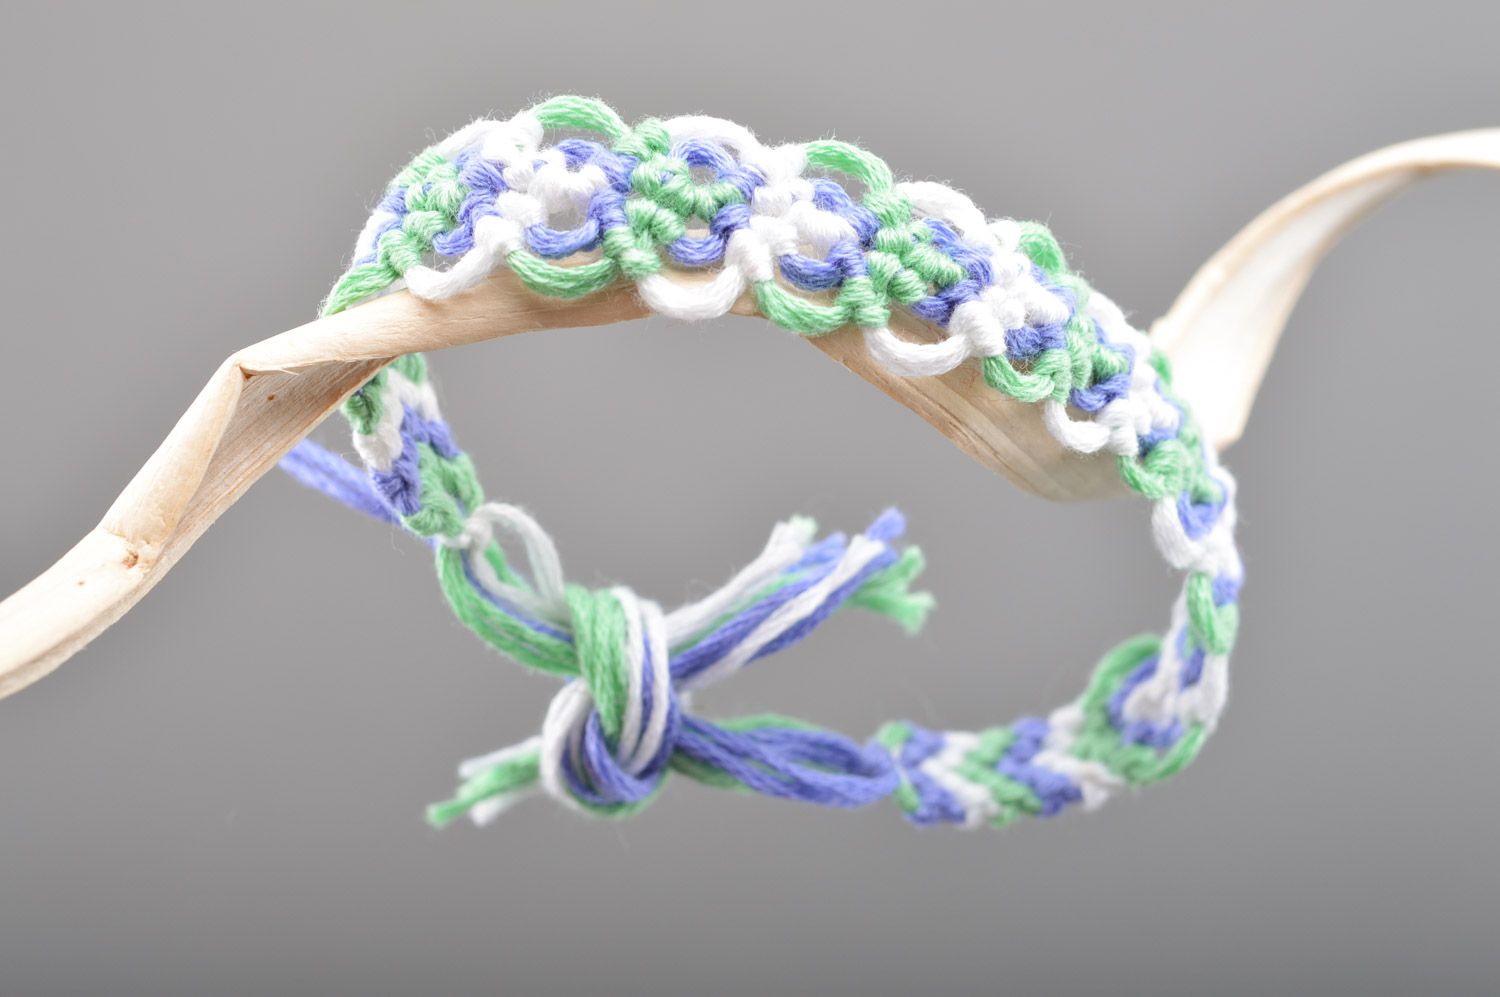 Thin handmade friendship wrist bracelet woven of embroidery floss in tender colors photo 5